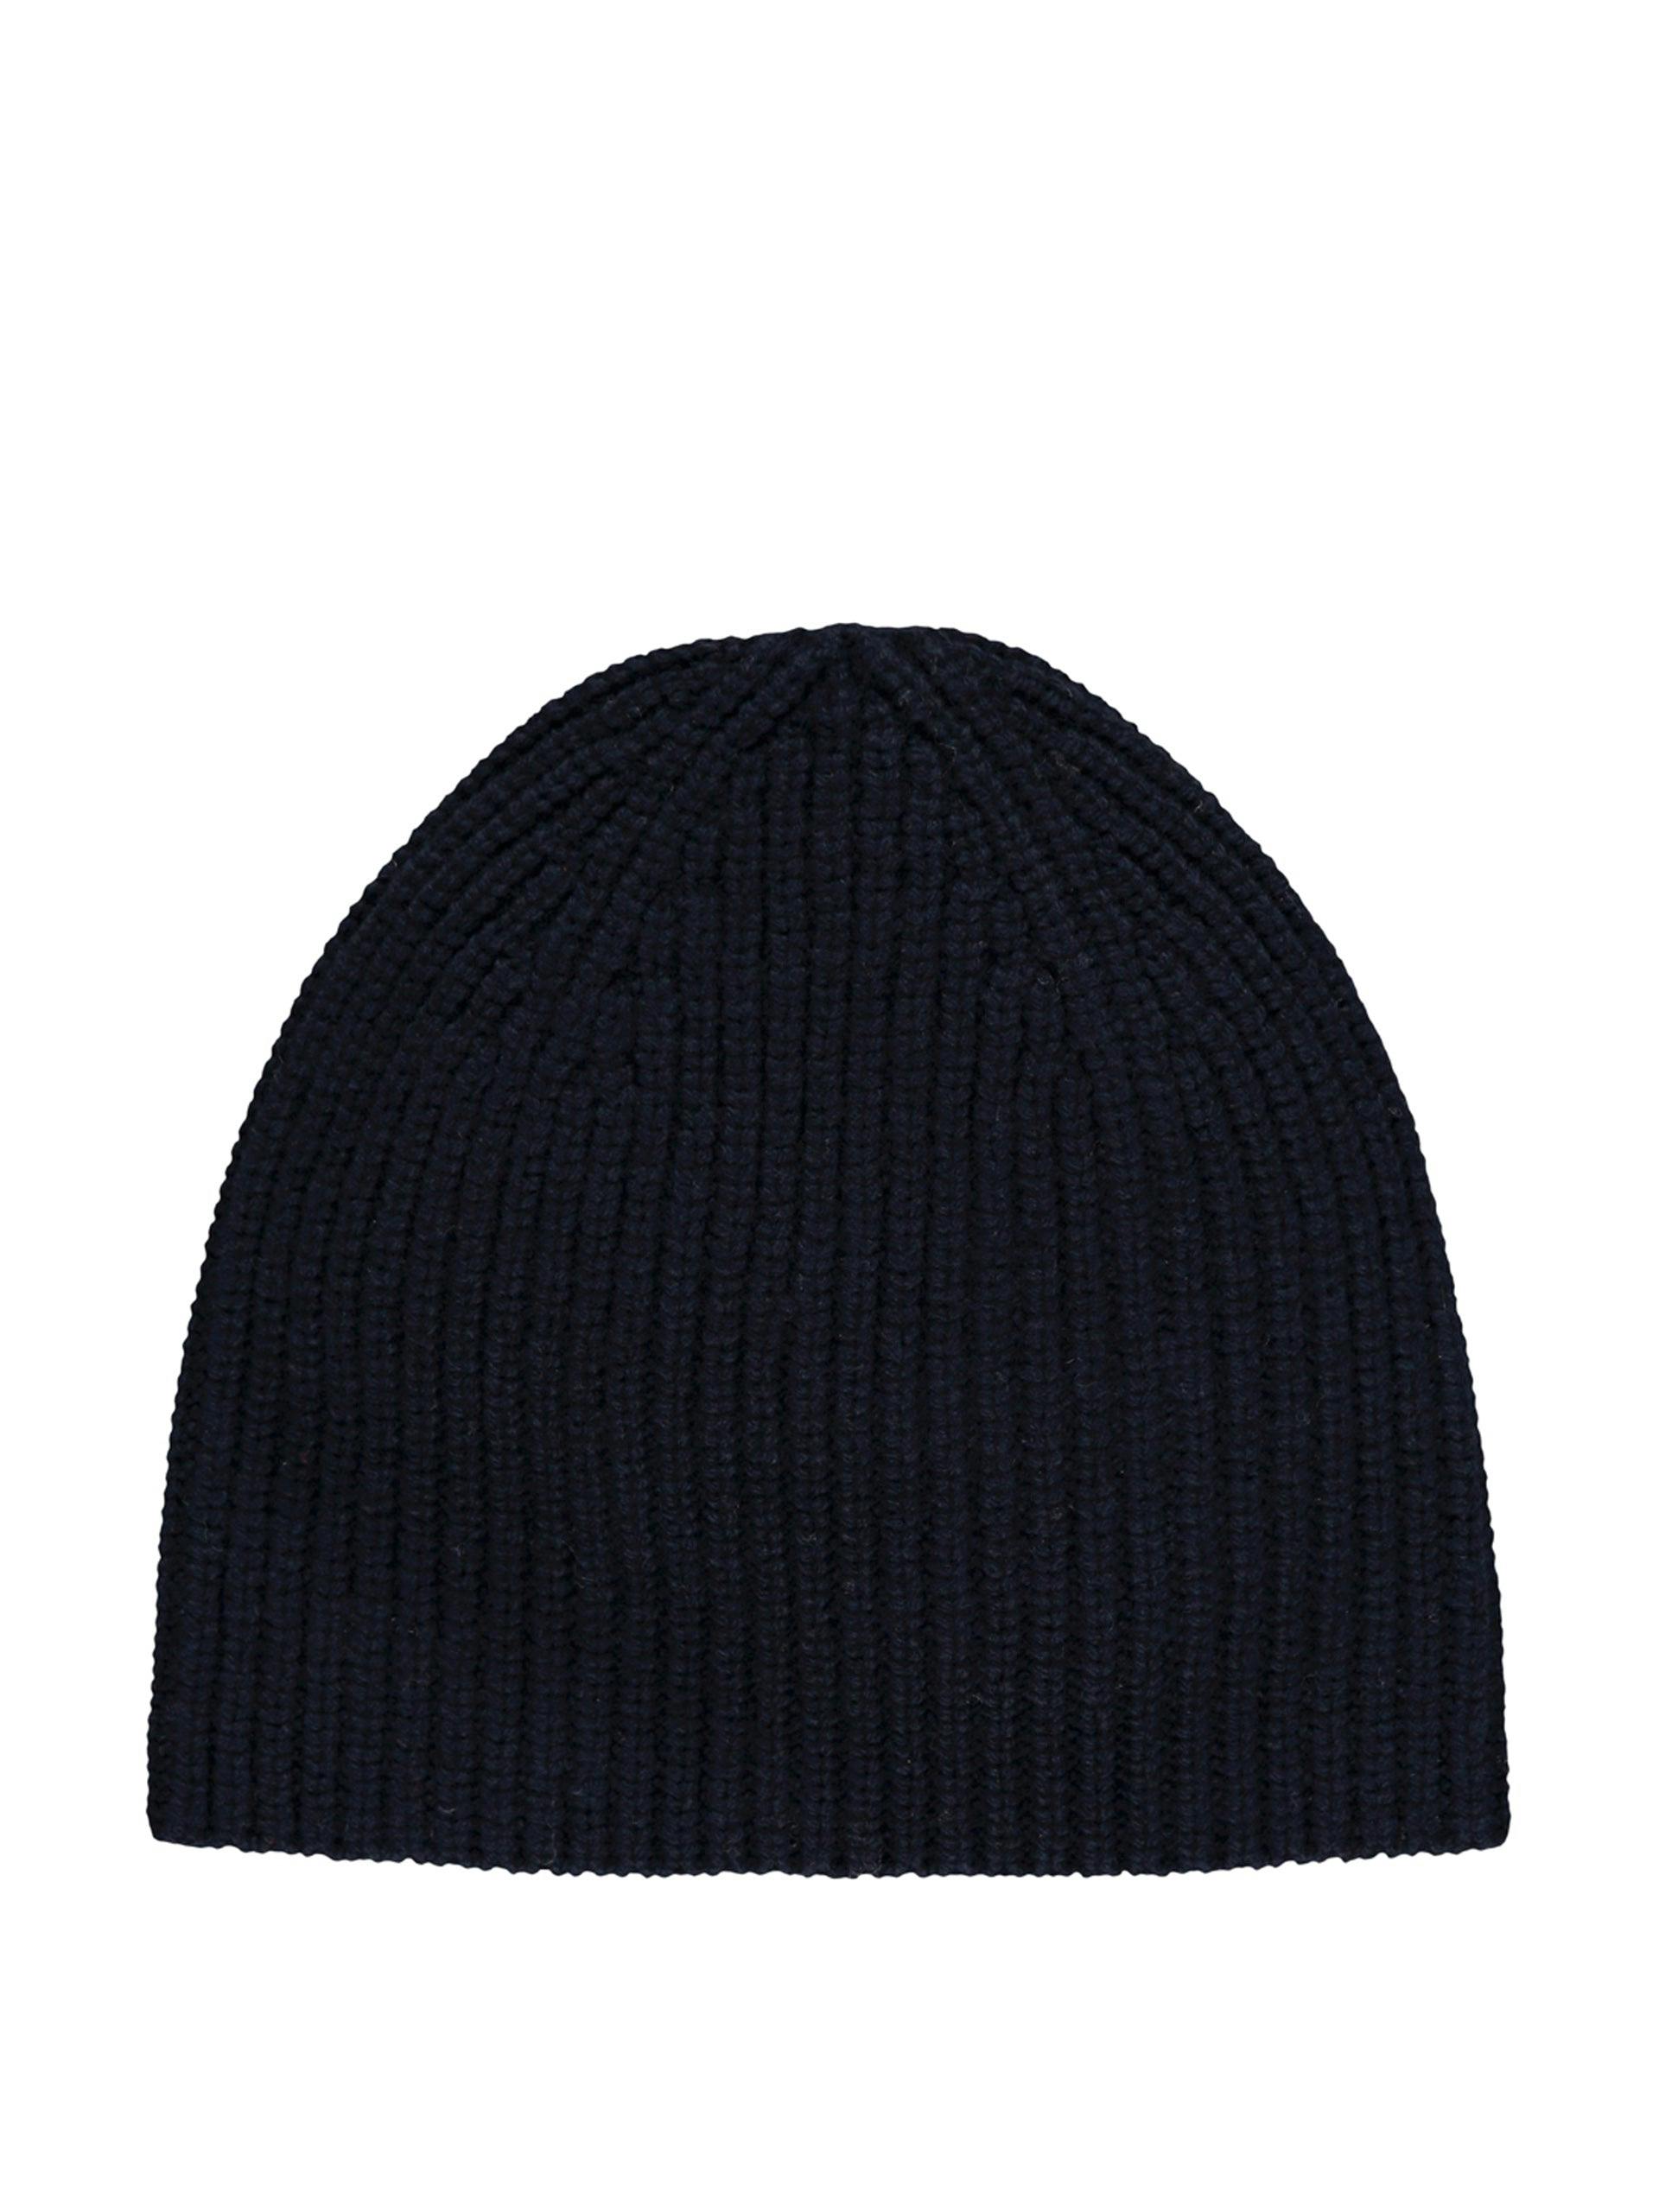 The Hat in navy